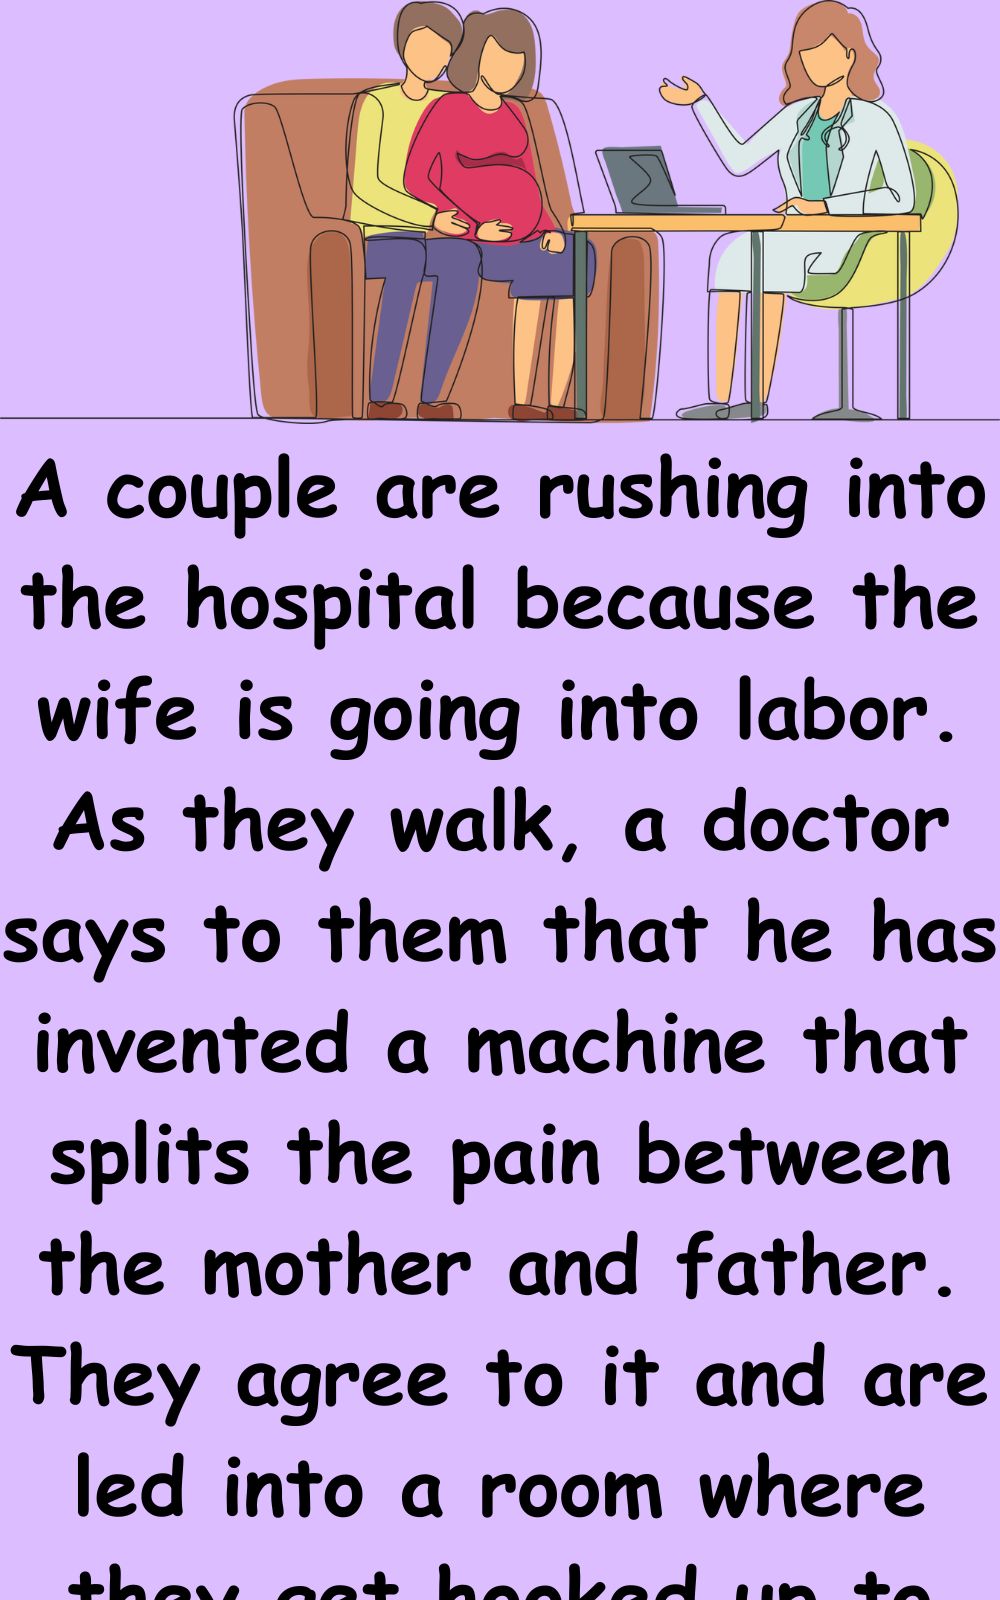 A couple are rushing into the hospital